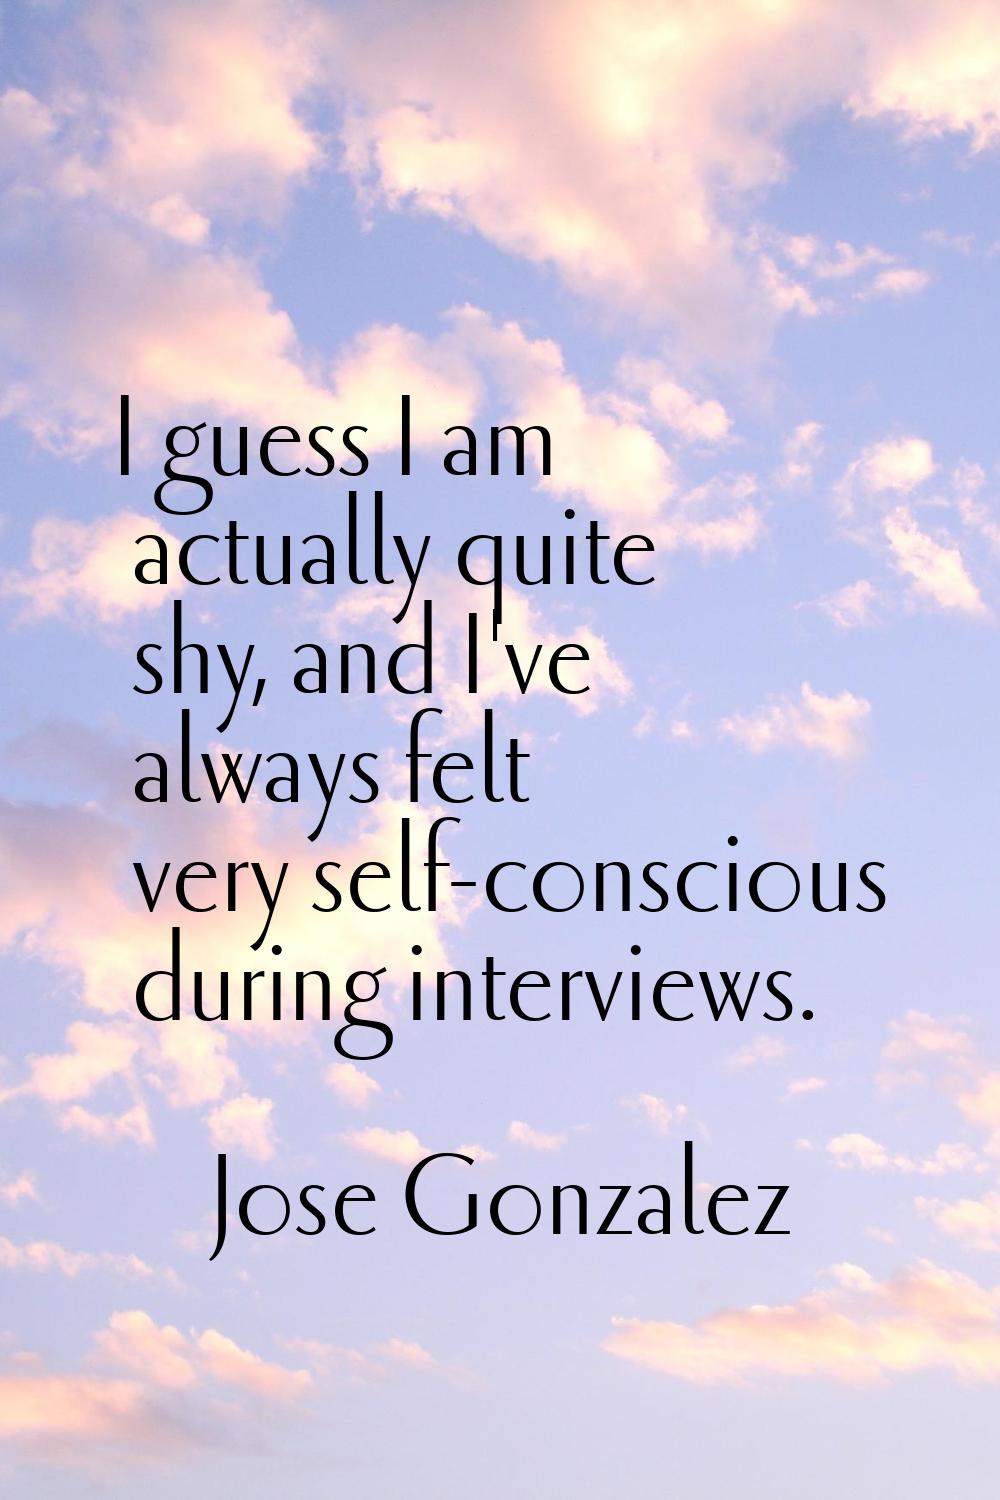 I guess I am actually quite shy, and I've always felt very self-conscious during interviews.